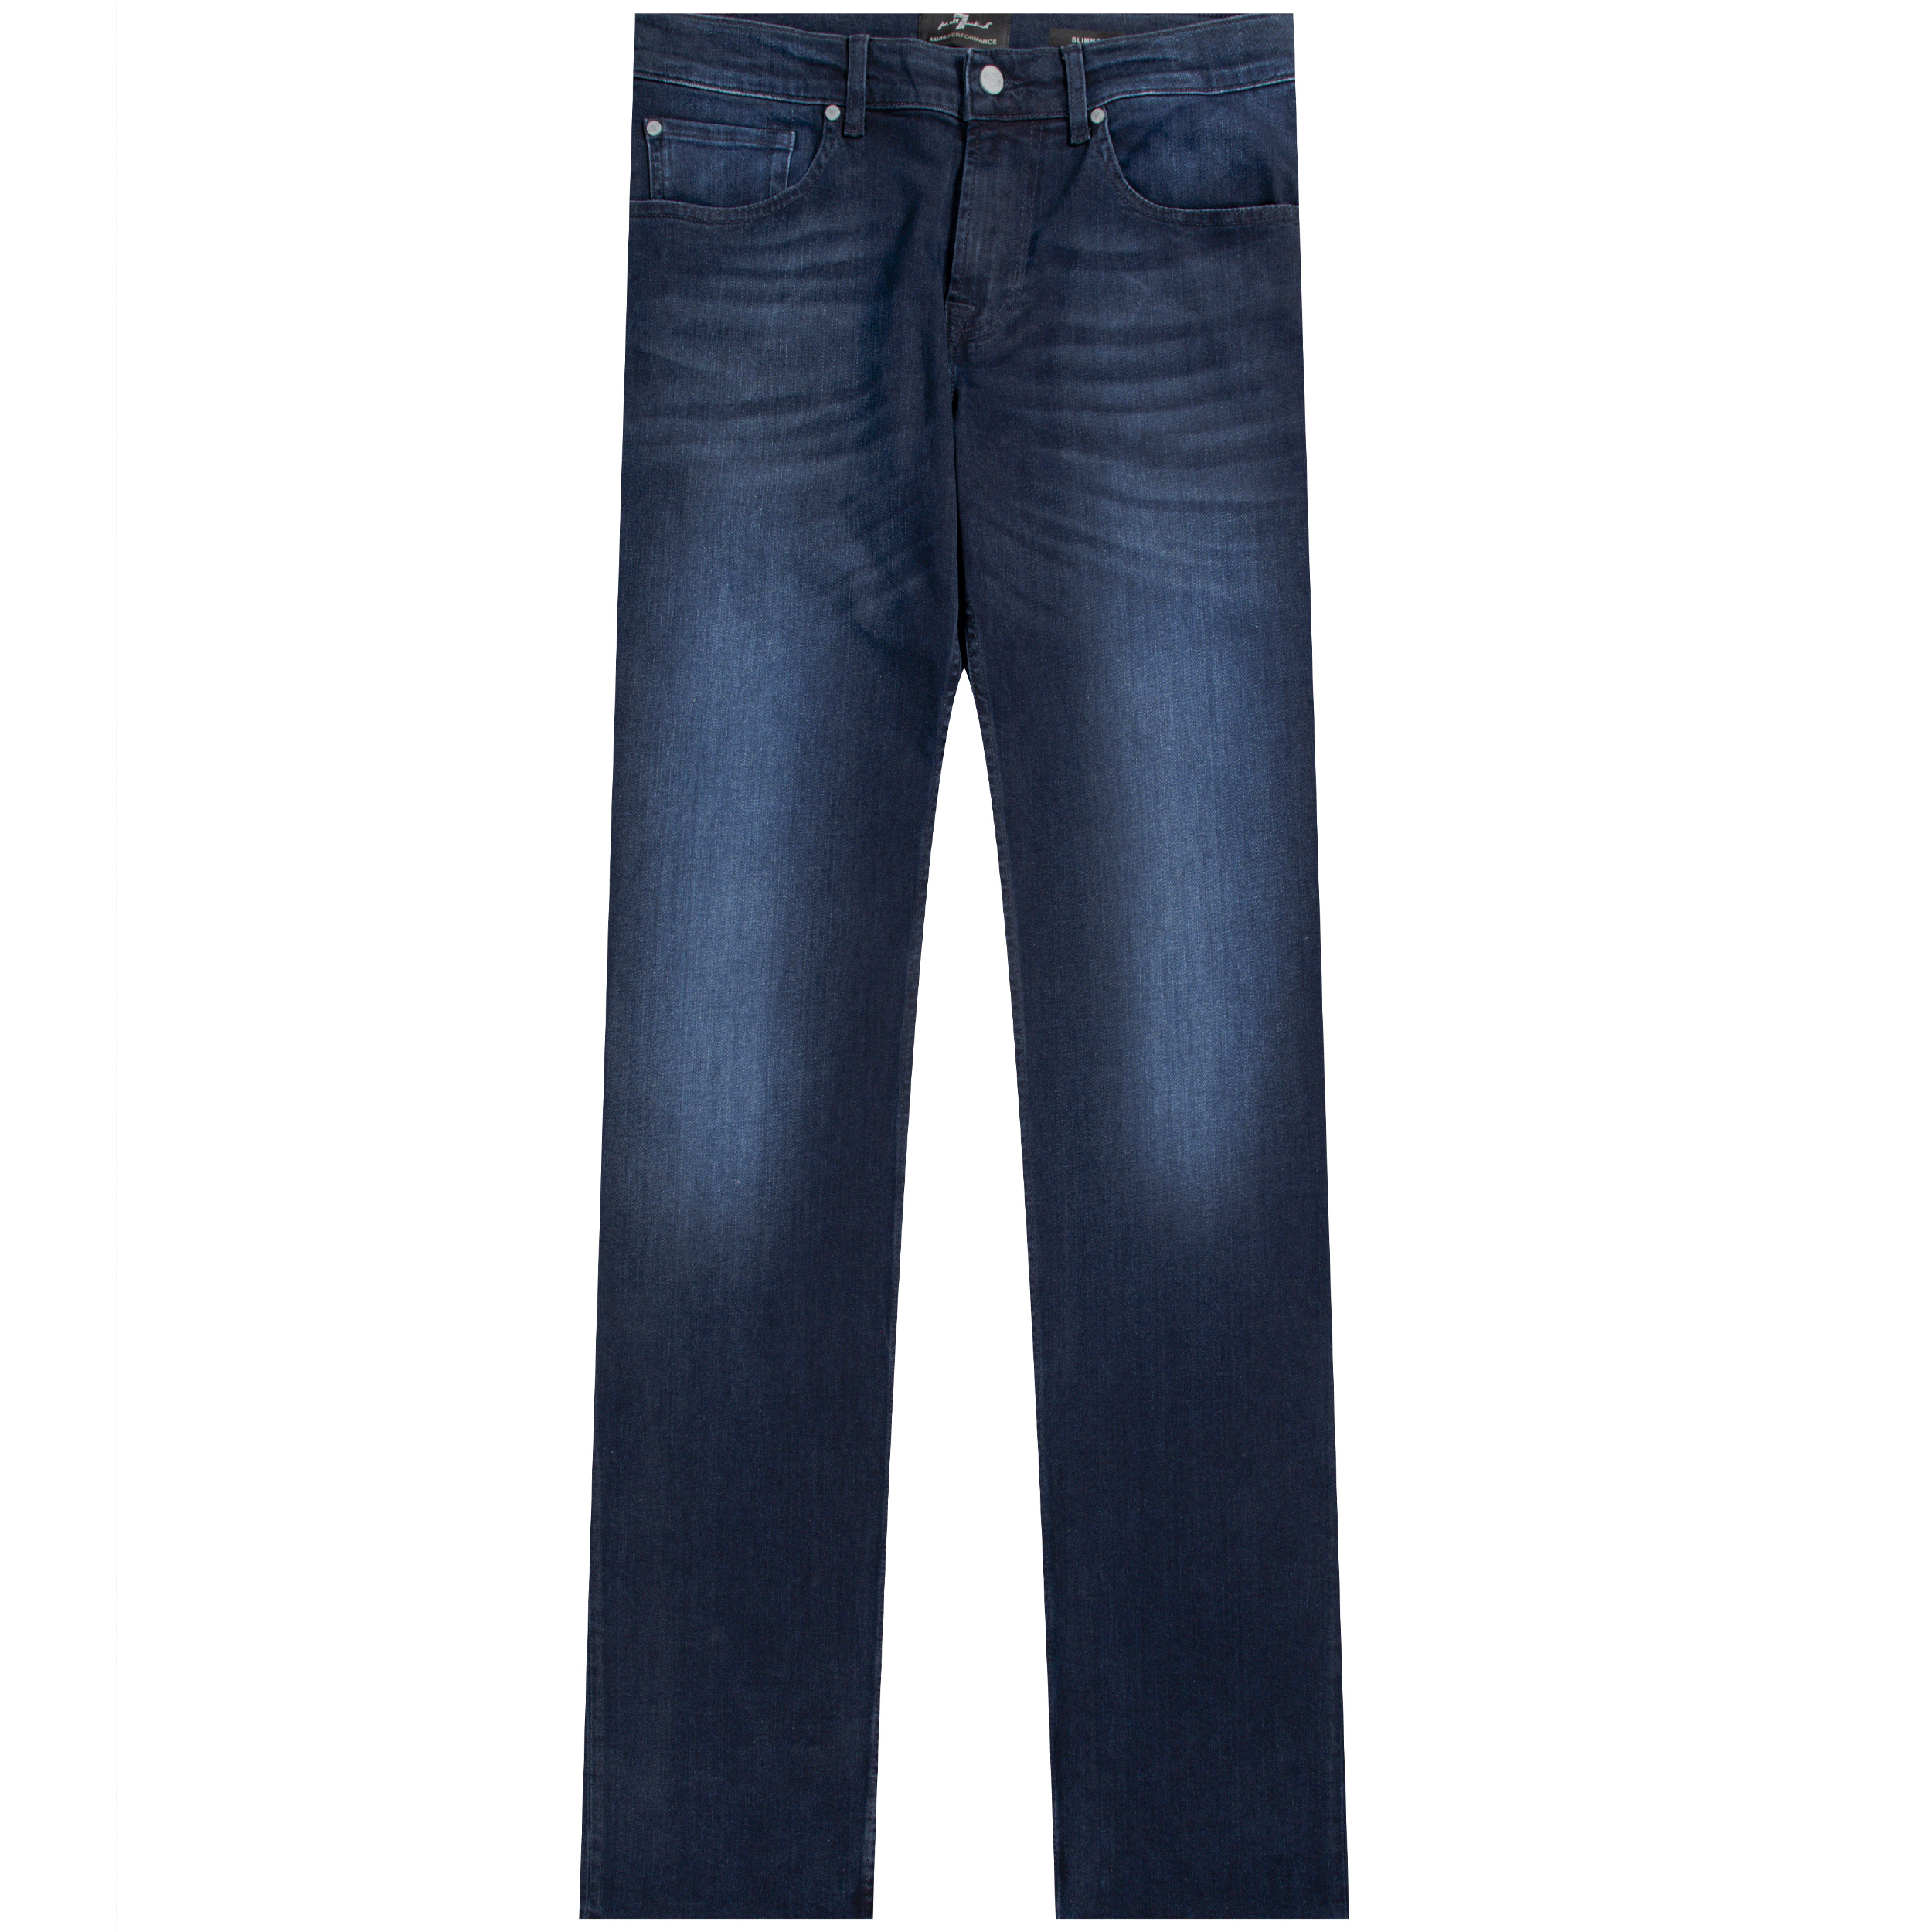 7 Jeans ’Luxe Performance’ Jeans Dark Blue Wash